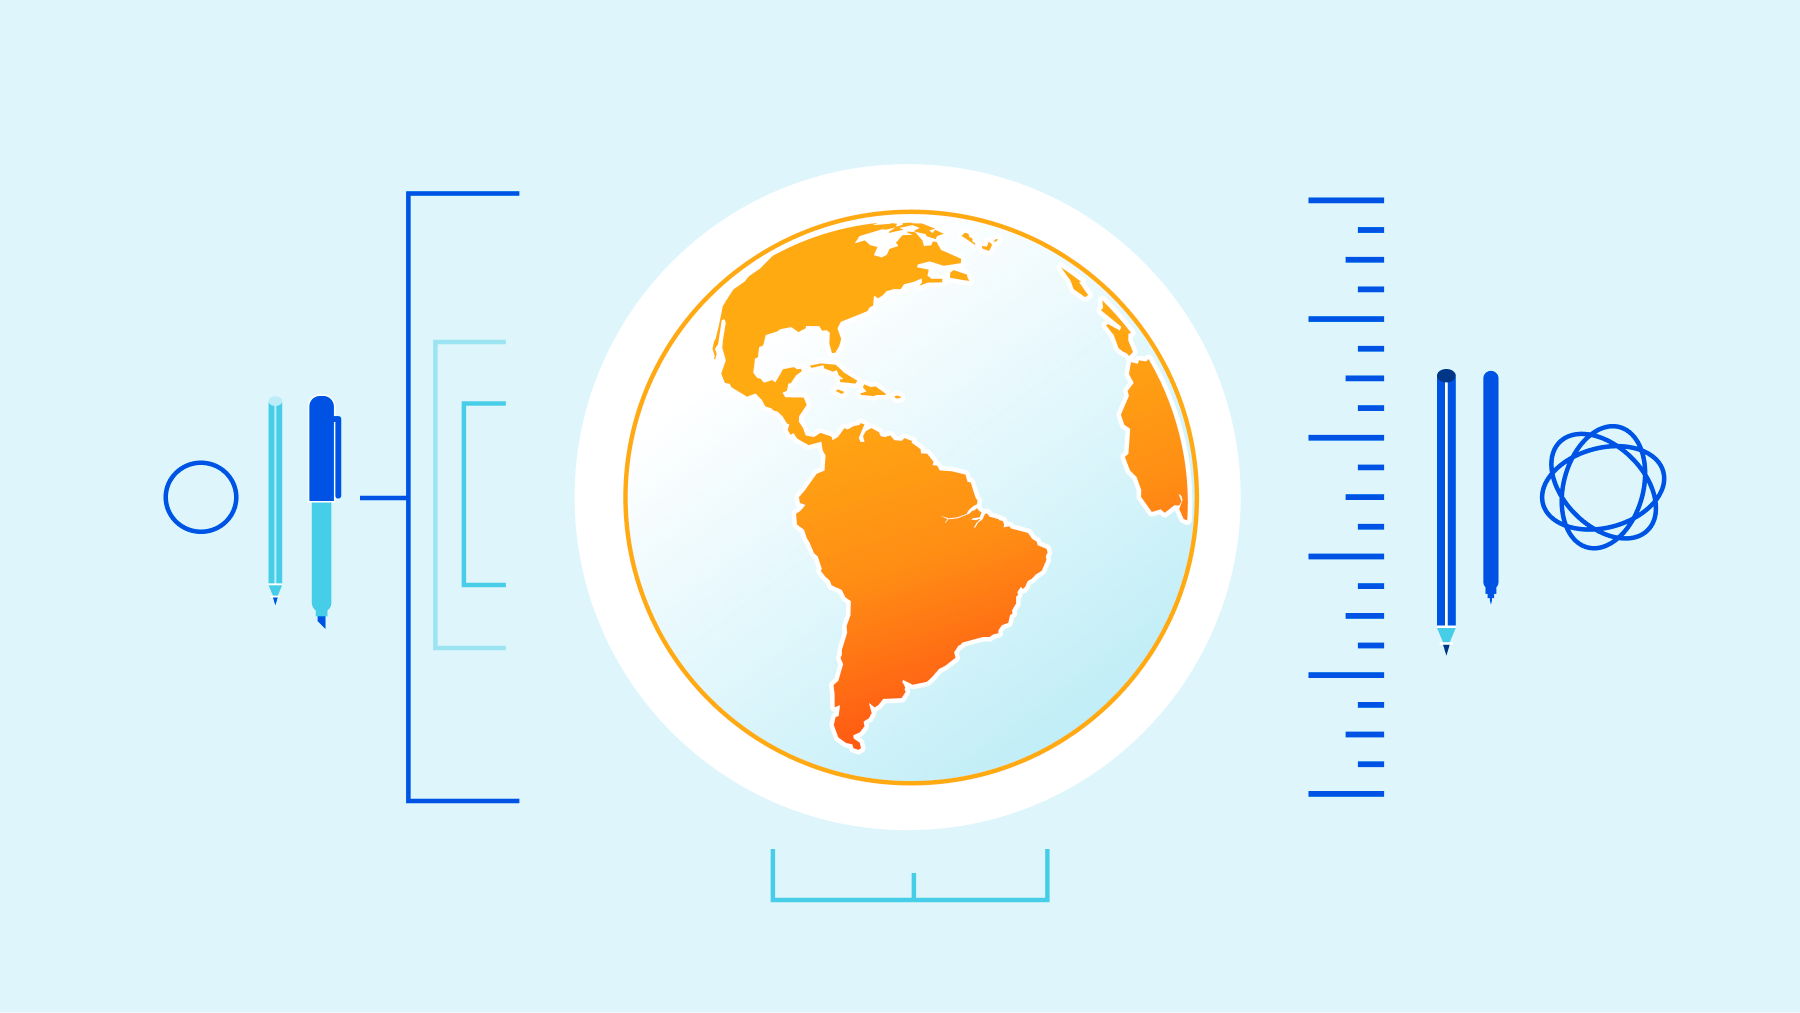 Cloudflare is faster than Netskope and Zscaler across LATAM.